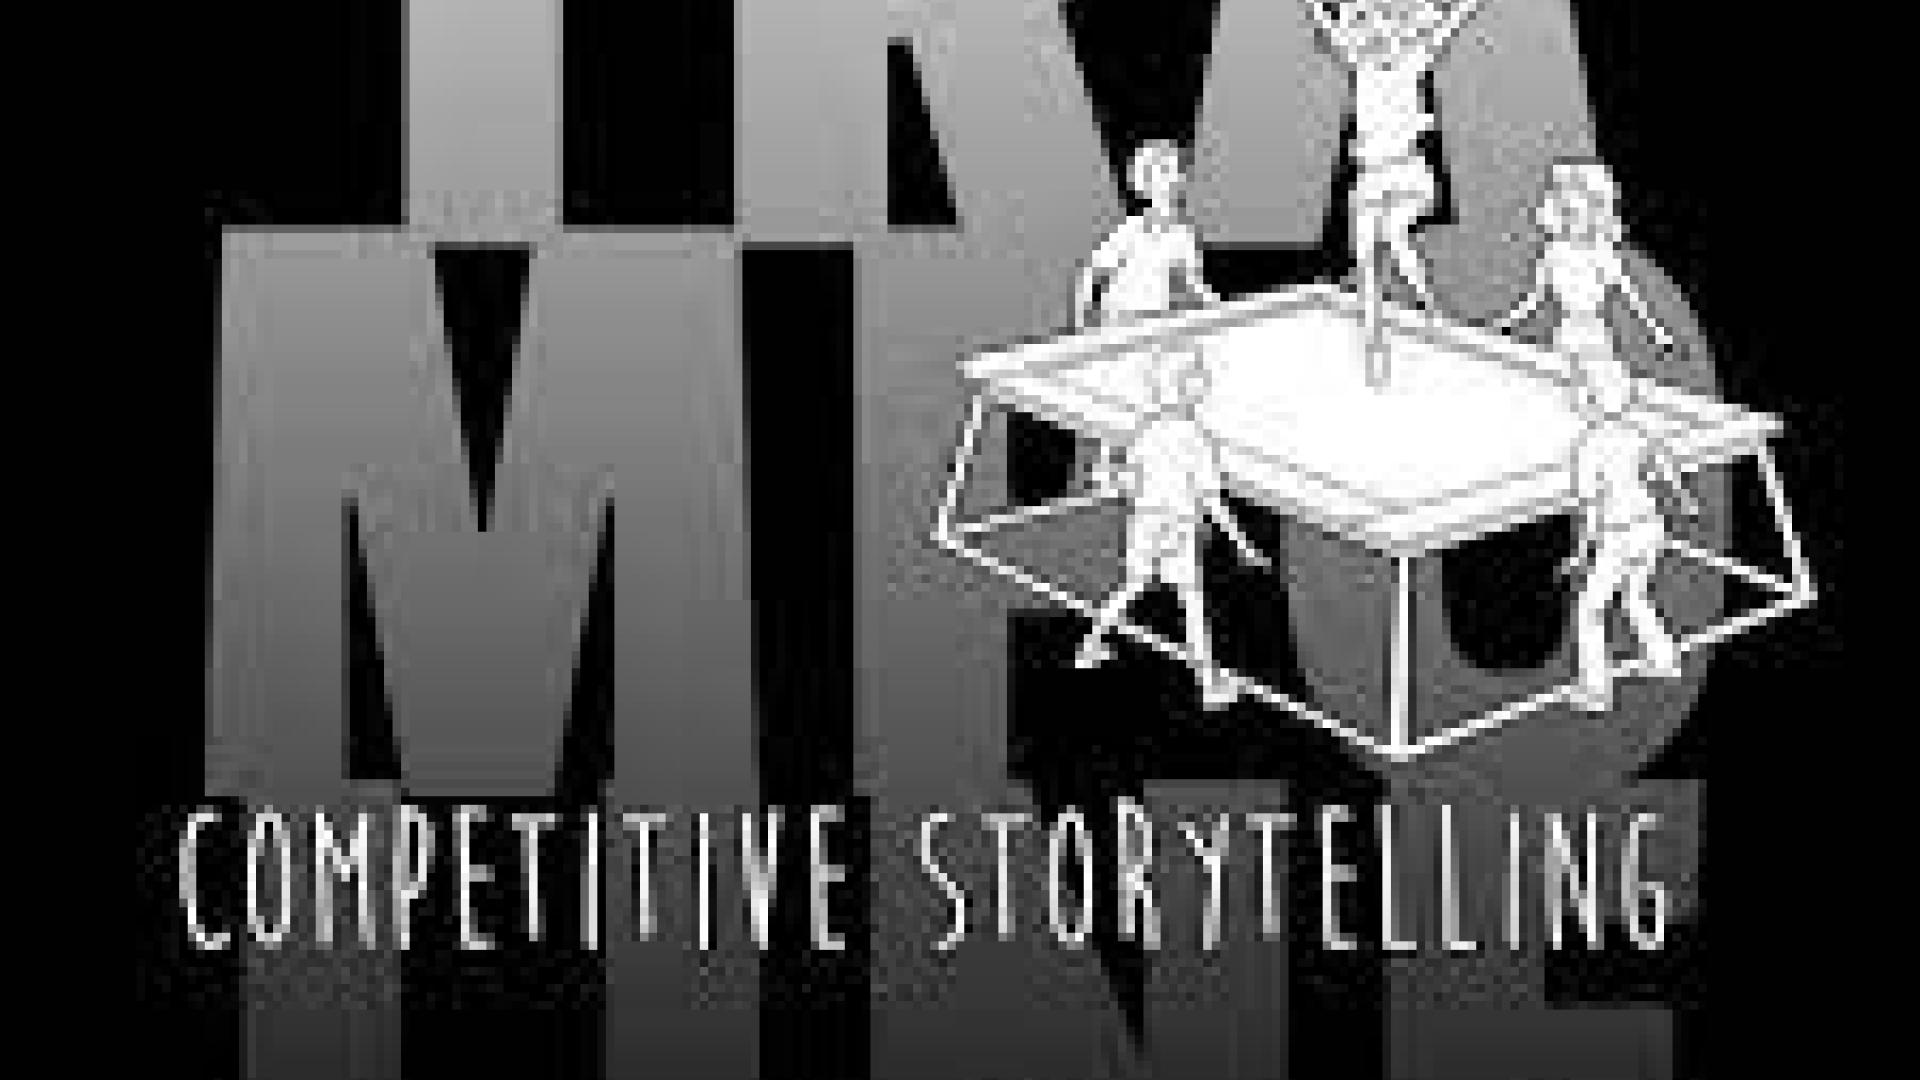 Trampoline: Competitive Storytelling